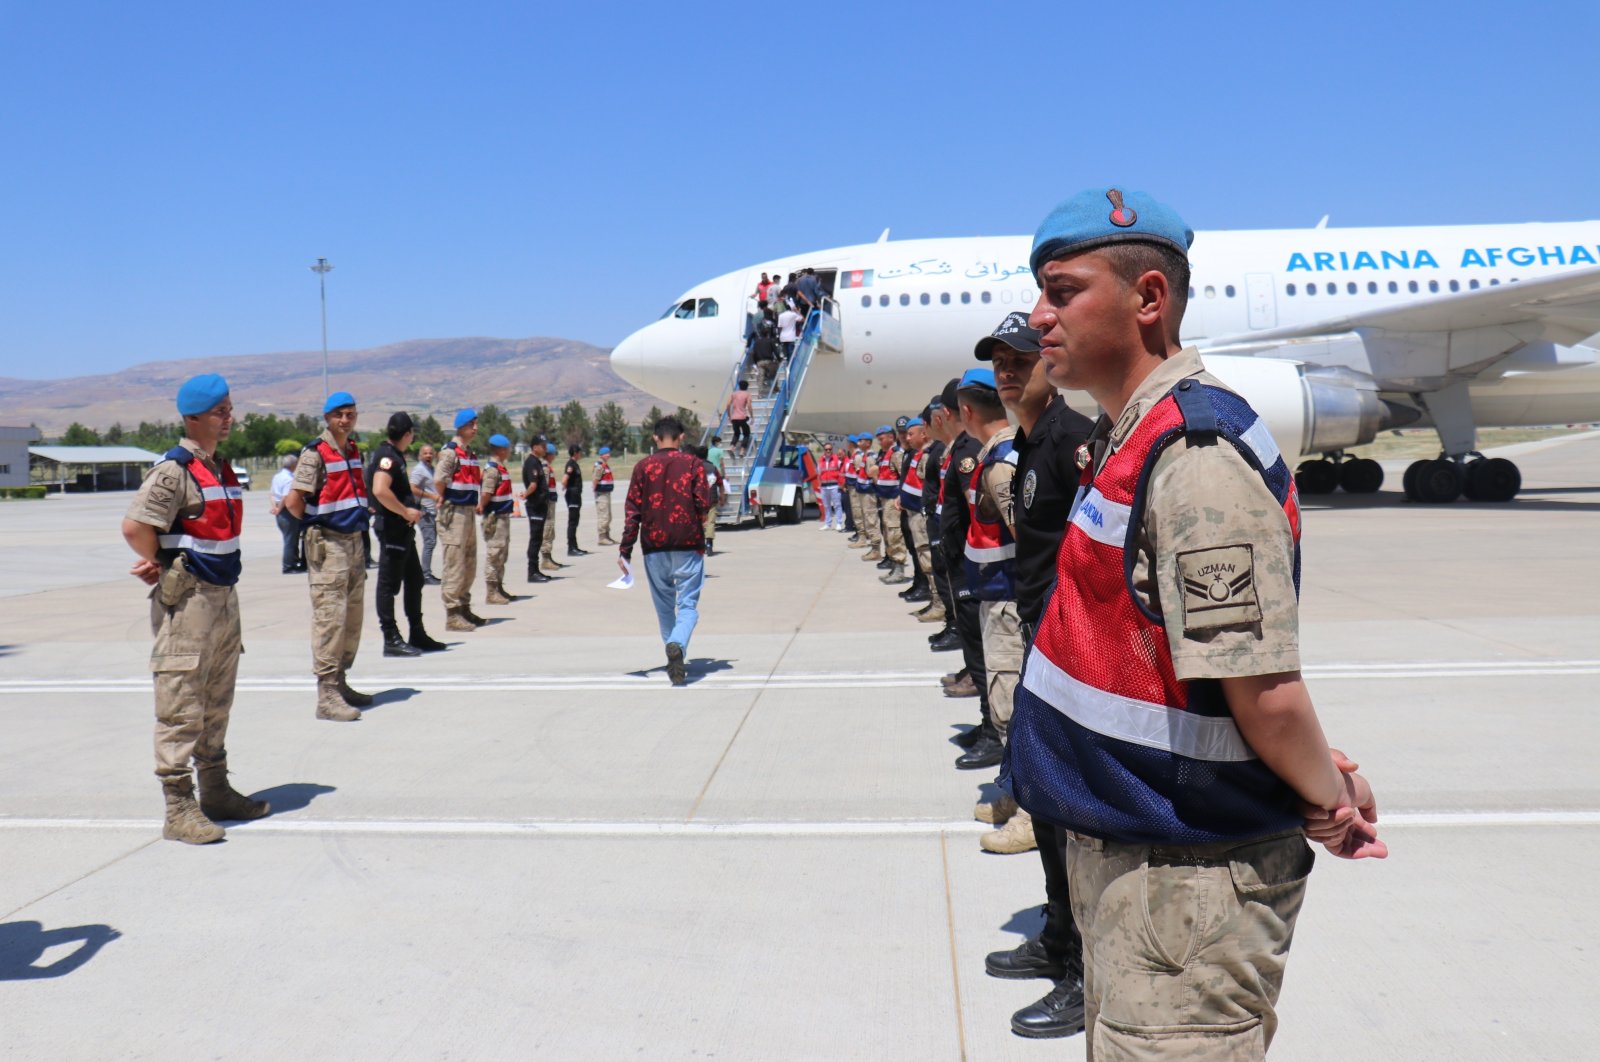 Some 135 Afghan migrants that entered the country illegally were repatriated from Malatya, Turkey, June 21, 2022 (IHA Photo)